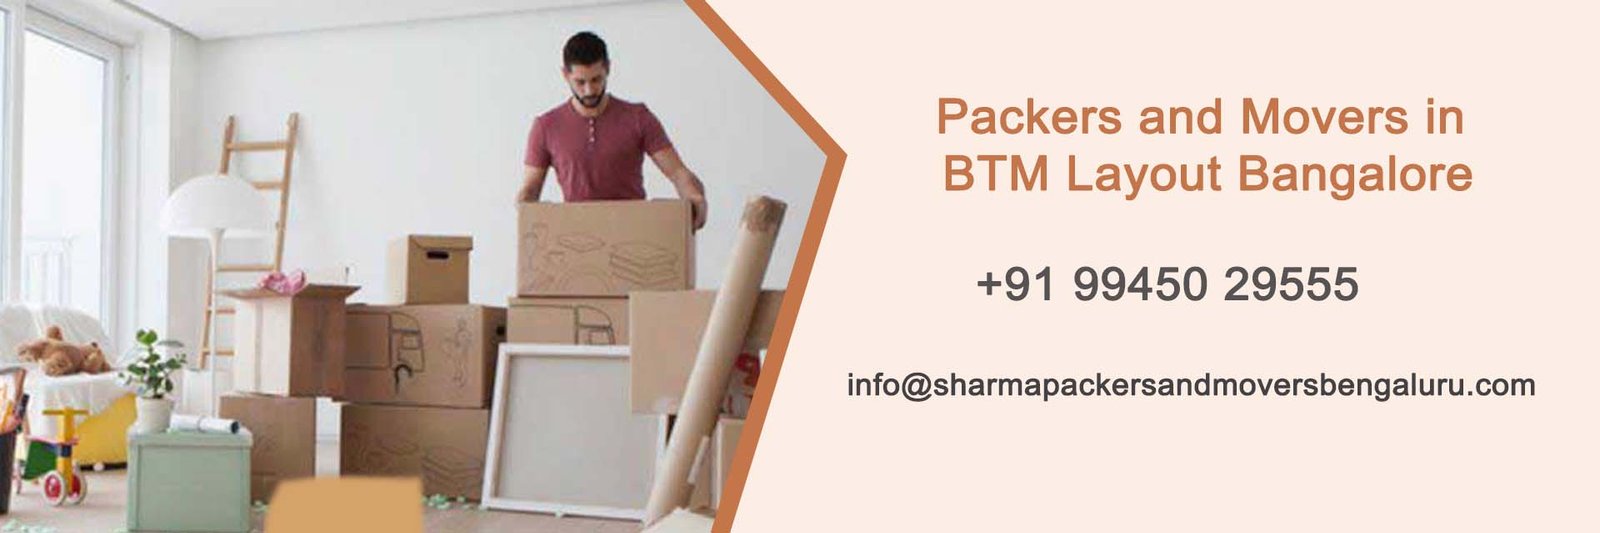 Packers and Movers in BTM Layout Bengaluru